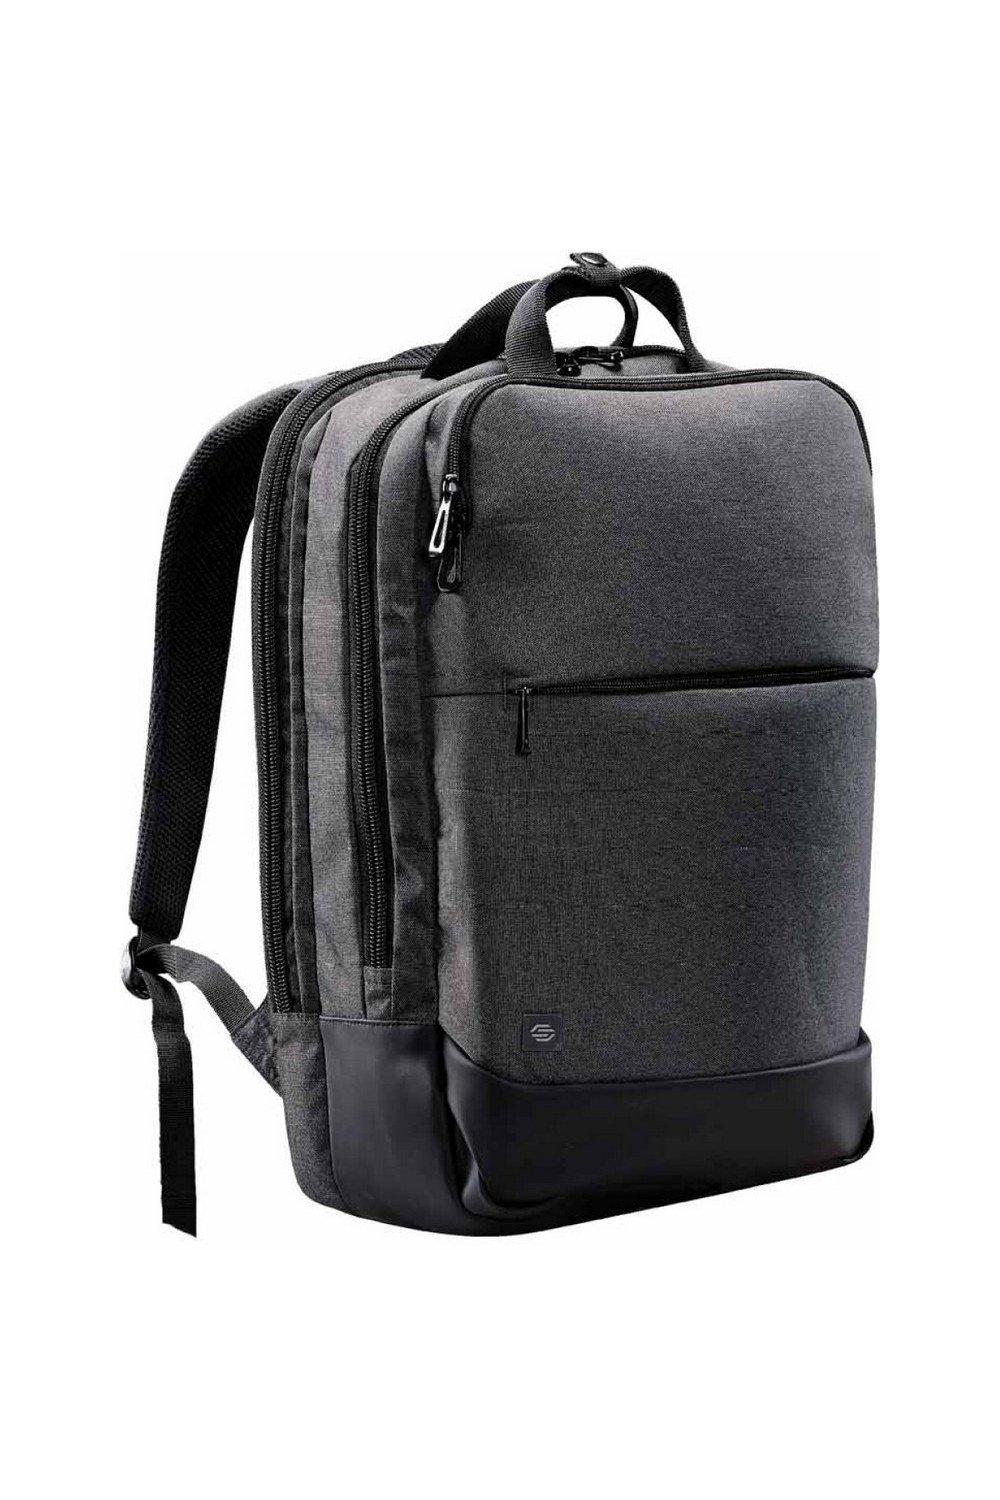 Yaletown Commuter Backpack